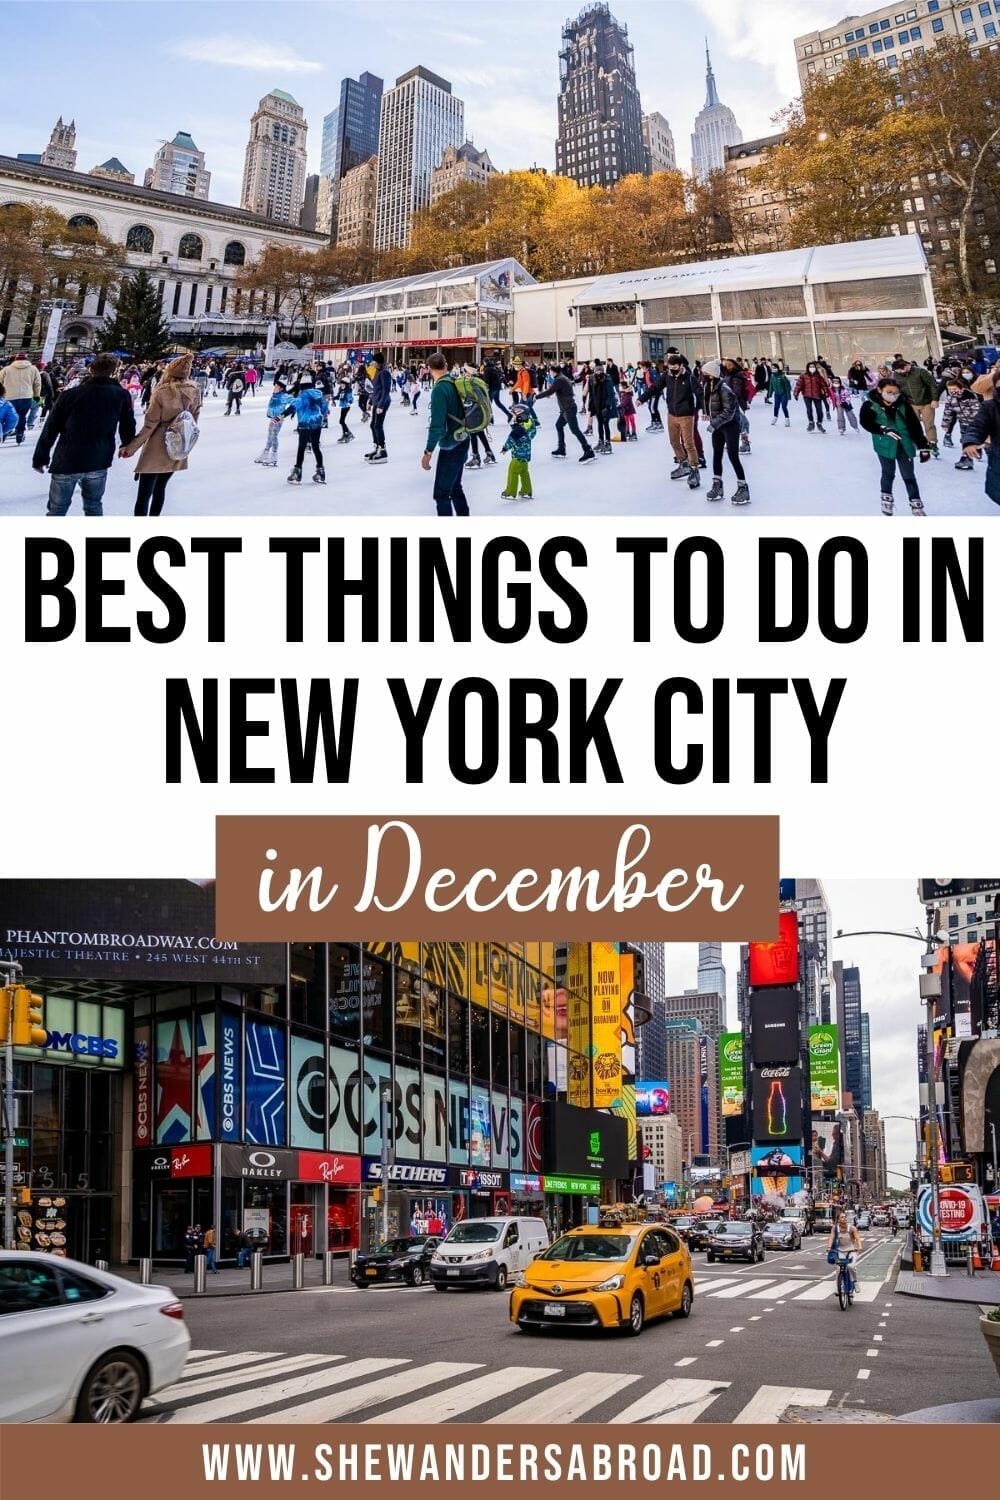 15 Festive Things to Do in New York City in December